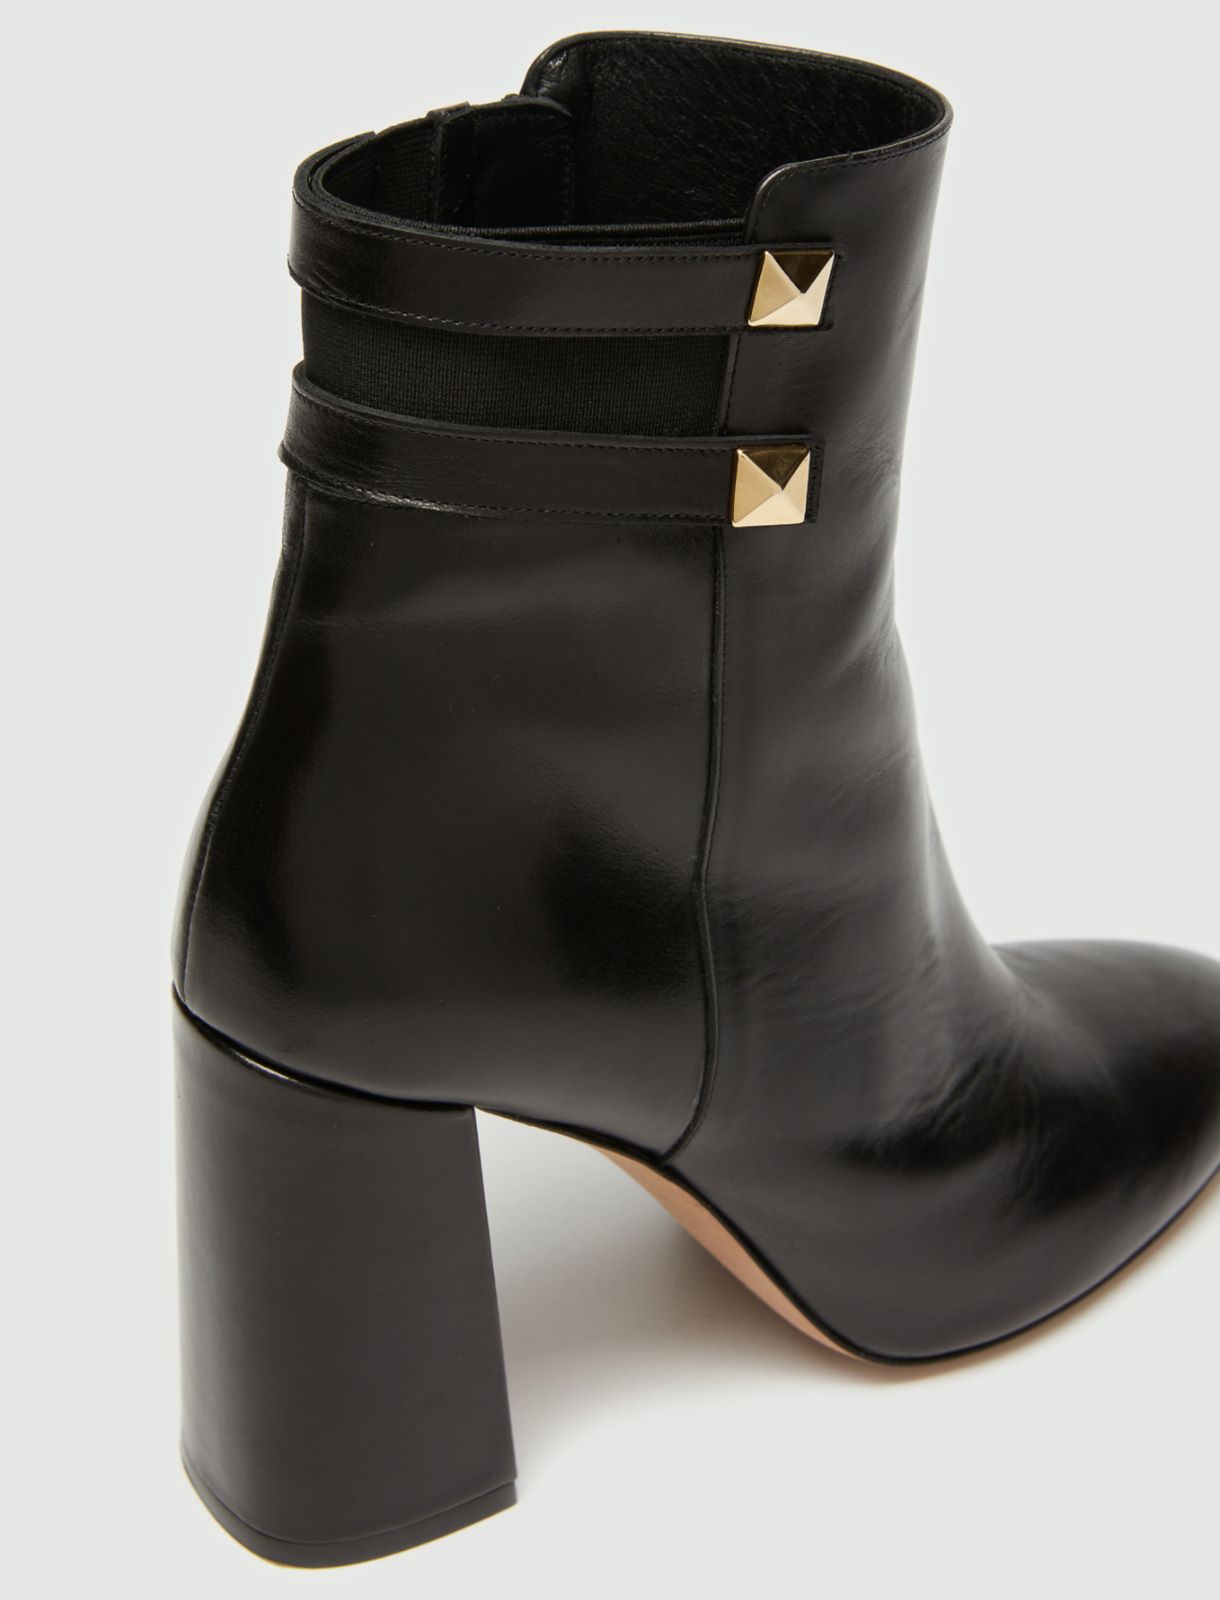 Studded ankle boots - Black - Marella - 4